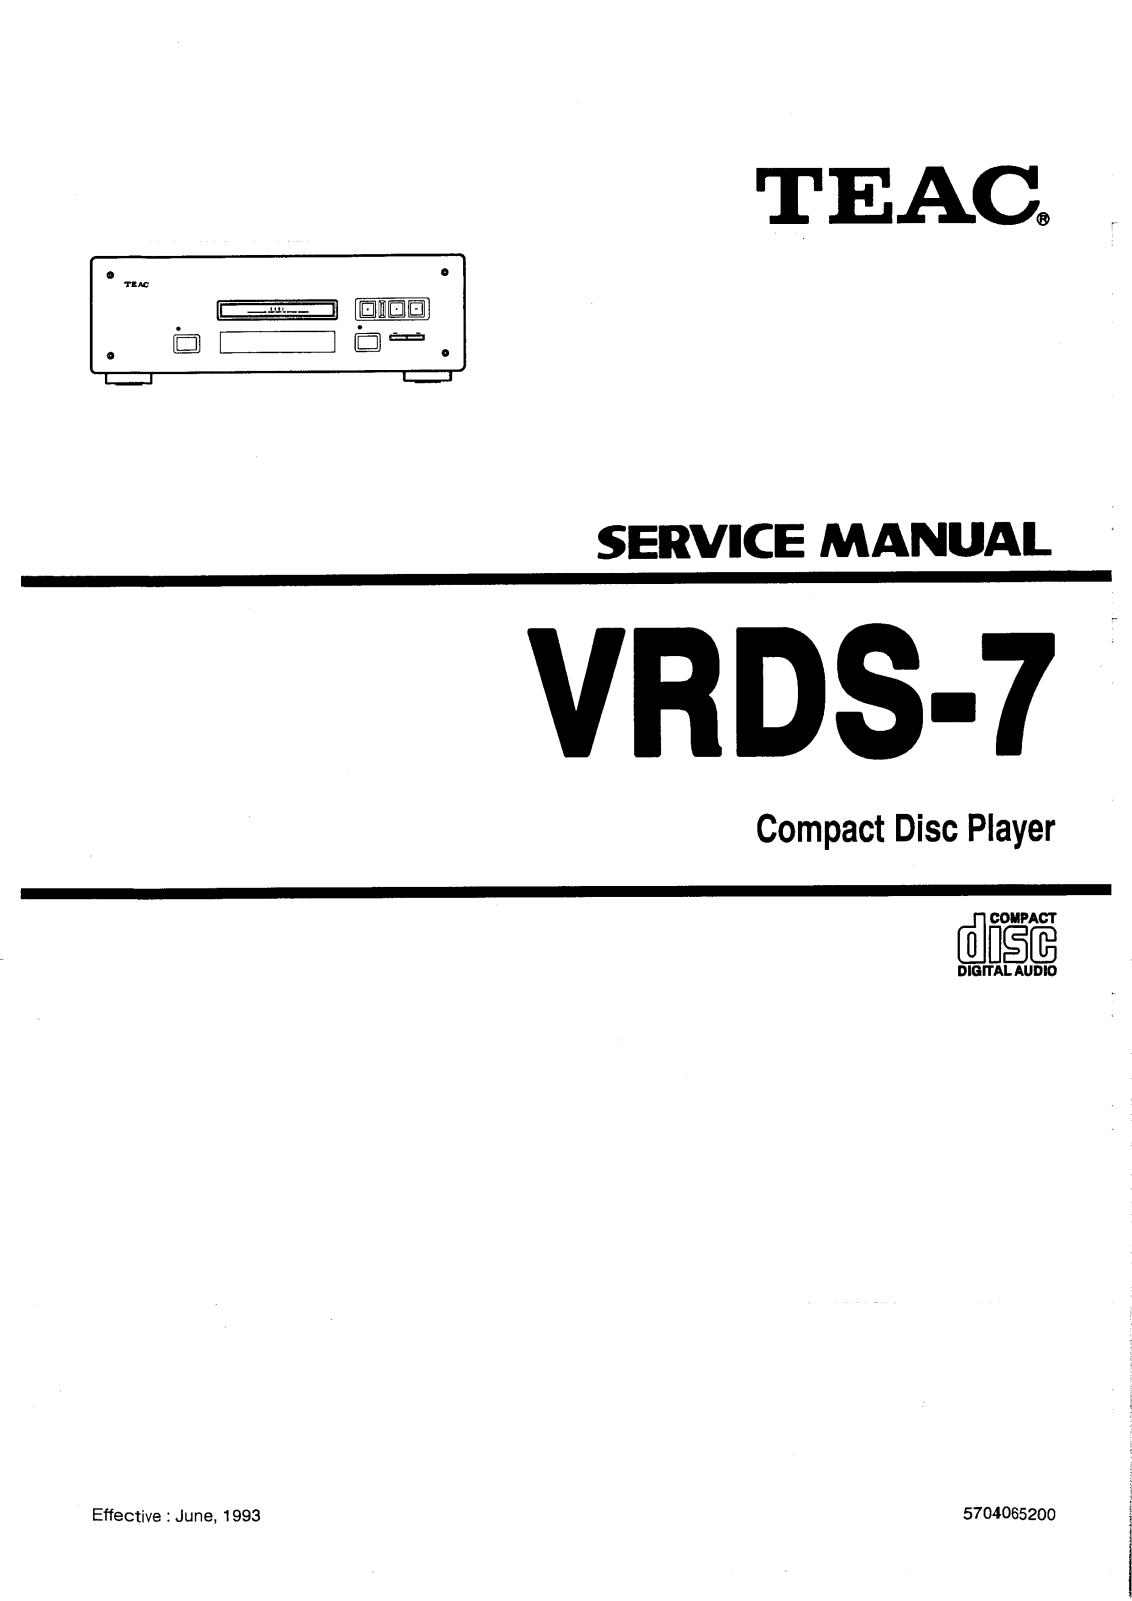 TEAC VRDS-7 Service manual